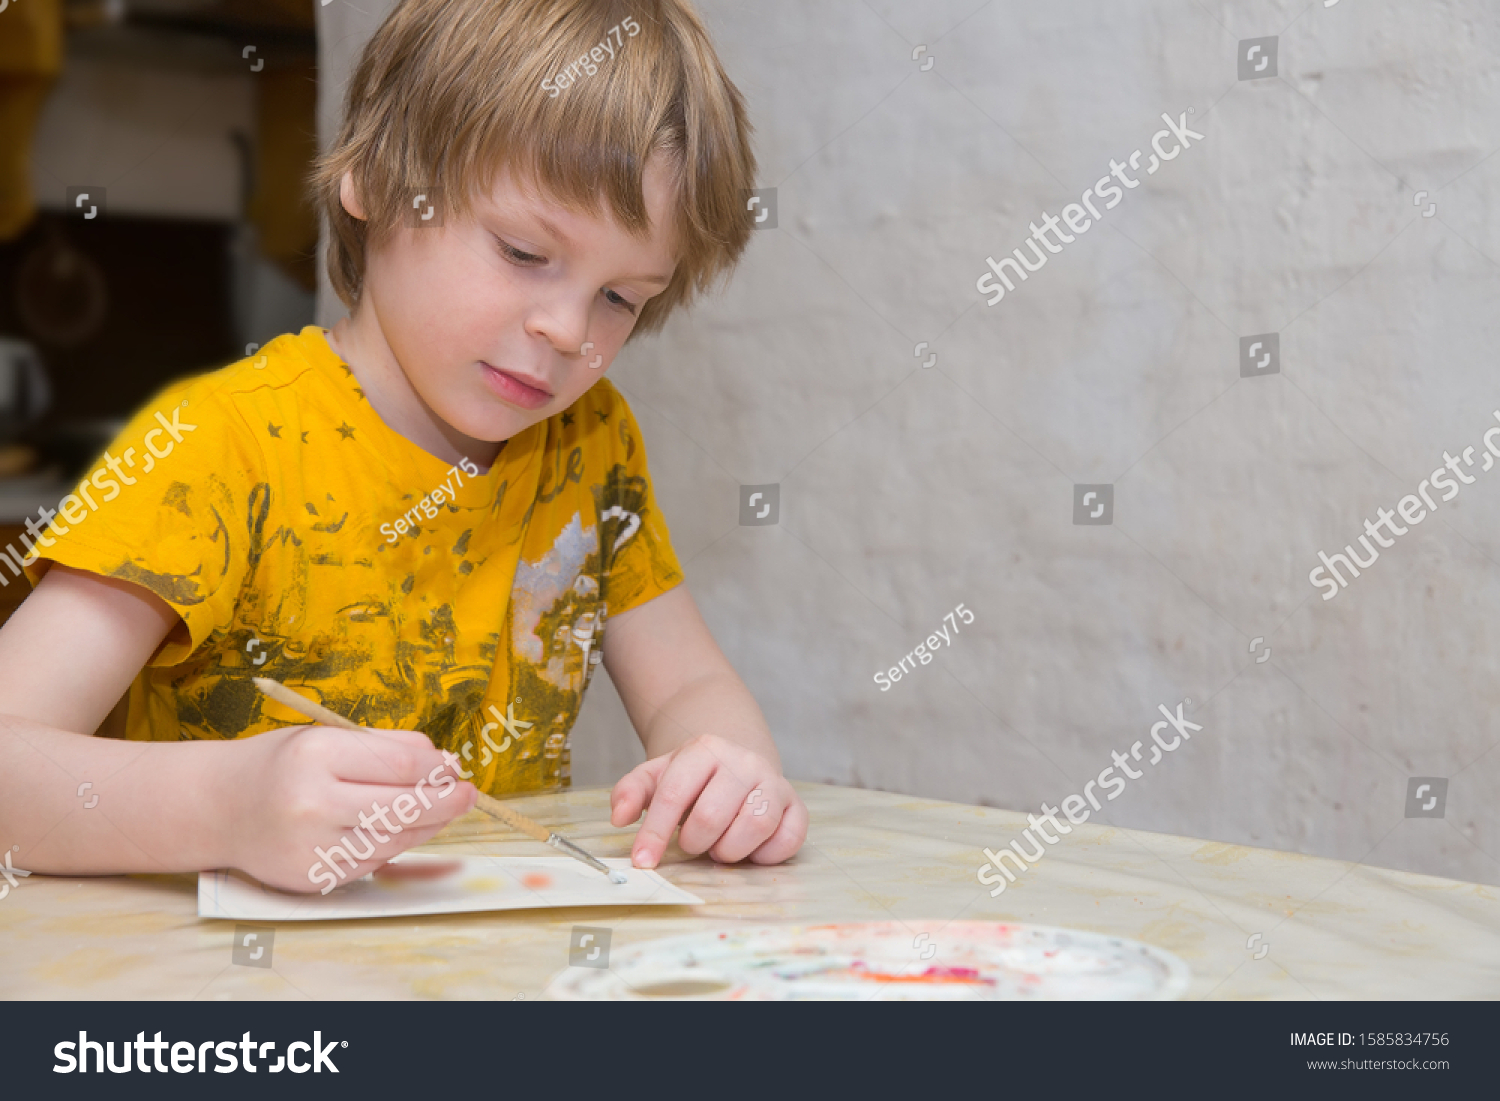 The child learns to draw. A boy of European appearance draws. Photos of real people. #1585834756